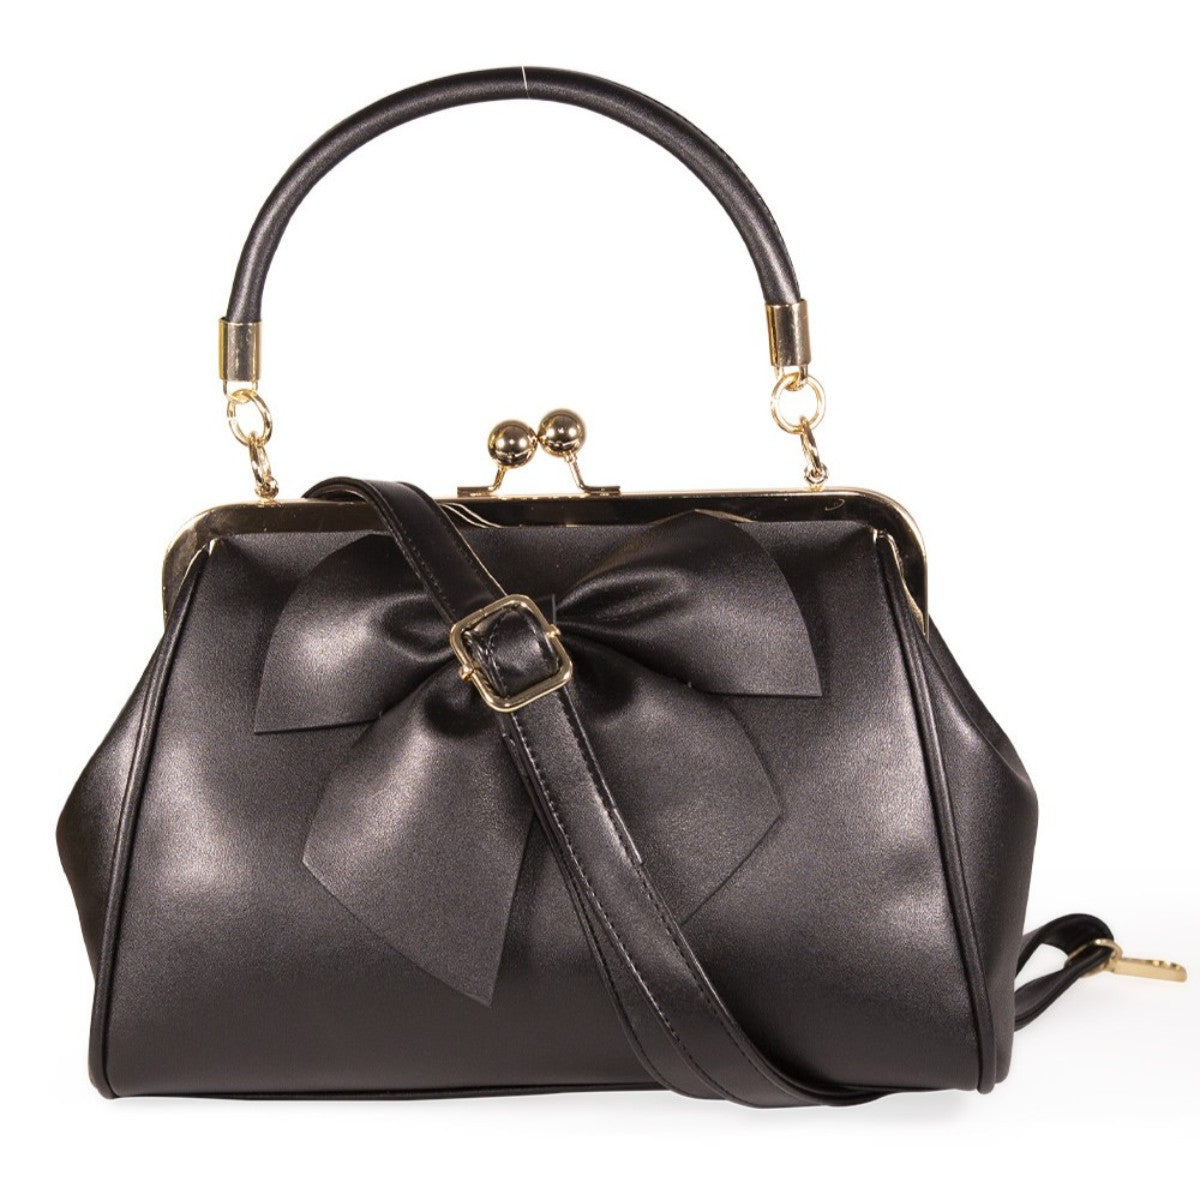 Banned Lockwood 1950's Retro Faux Leather Bow Bag